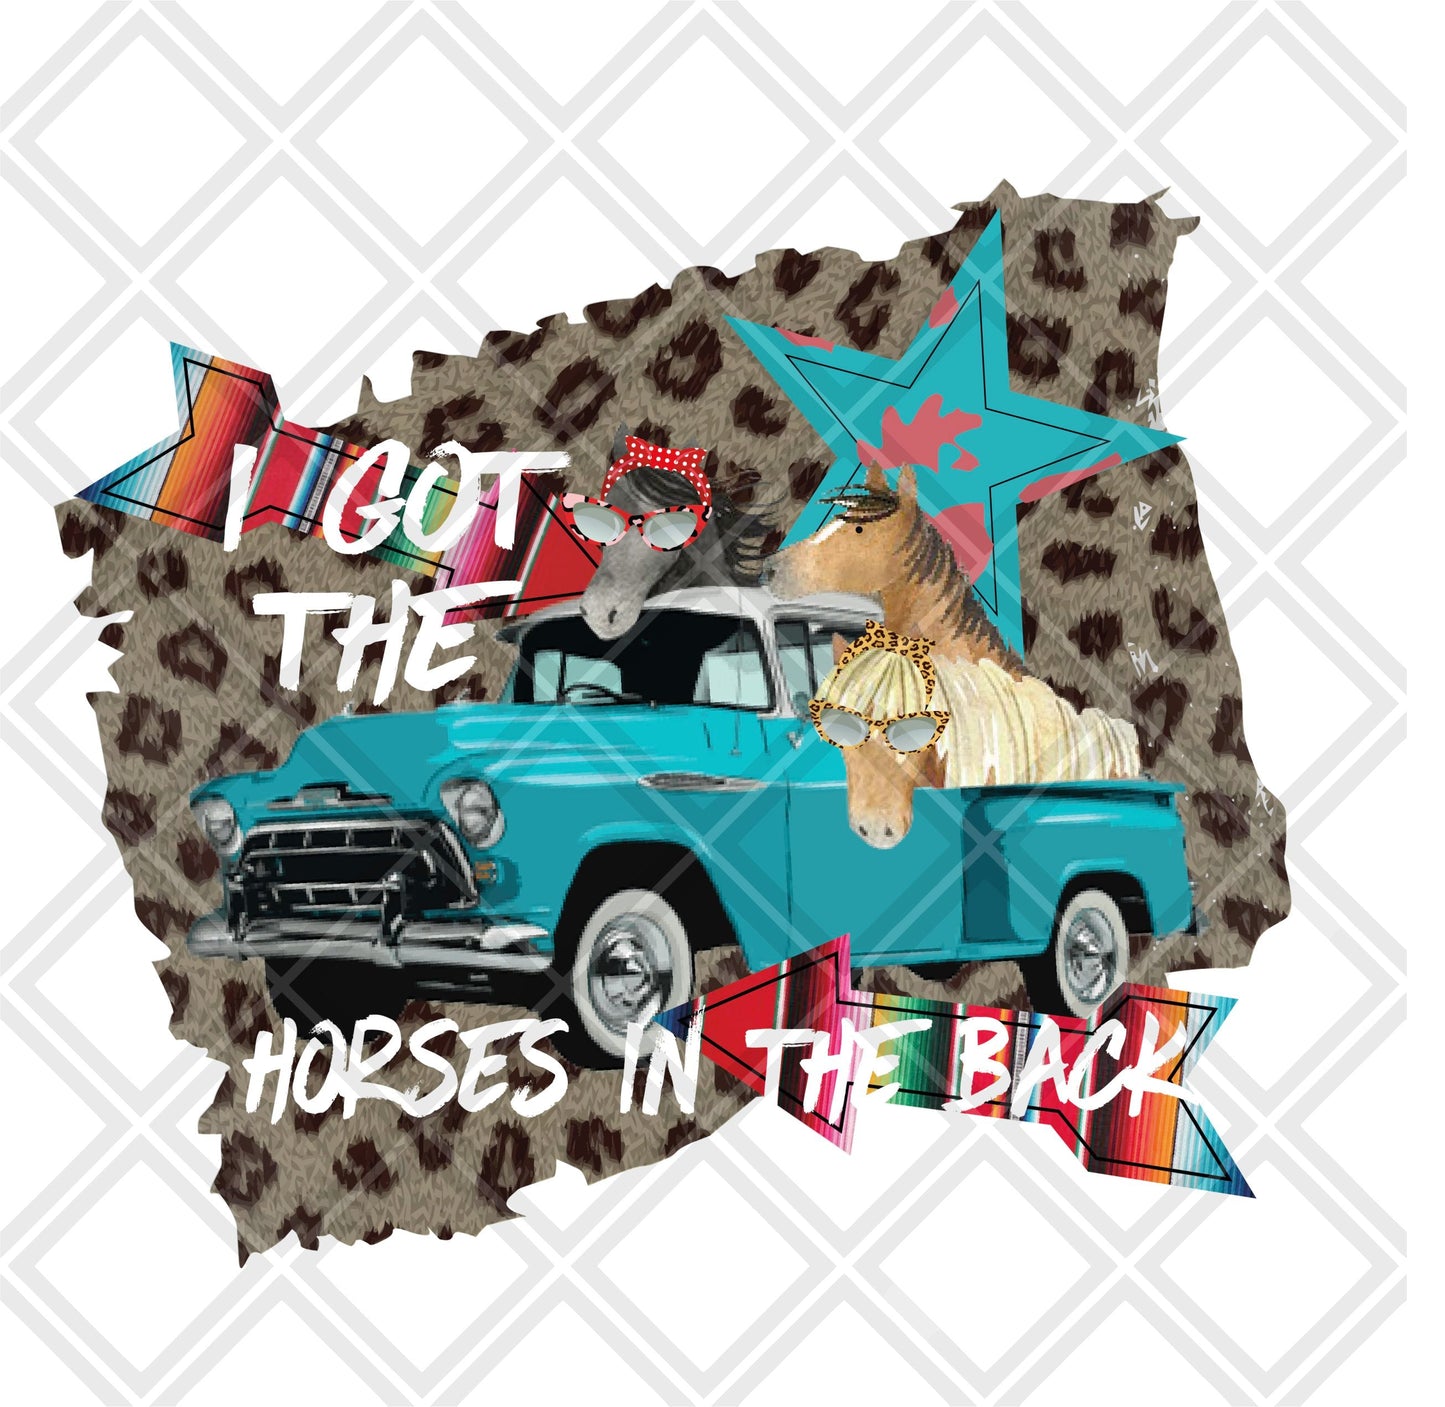 I got the horses in the back png Digital Download Instand Download